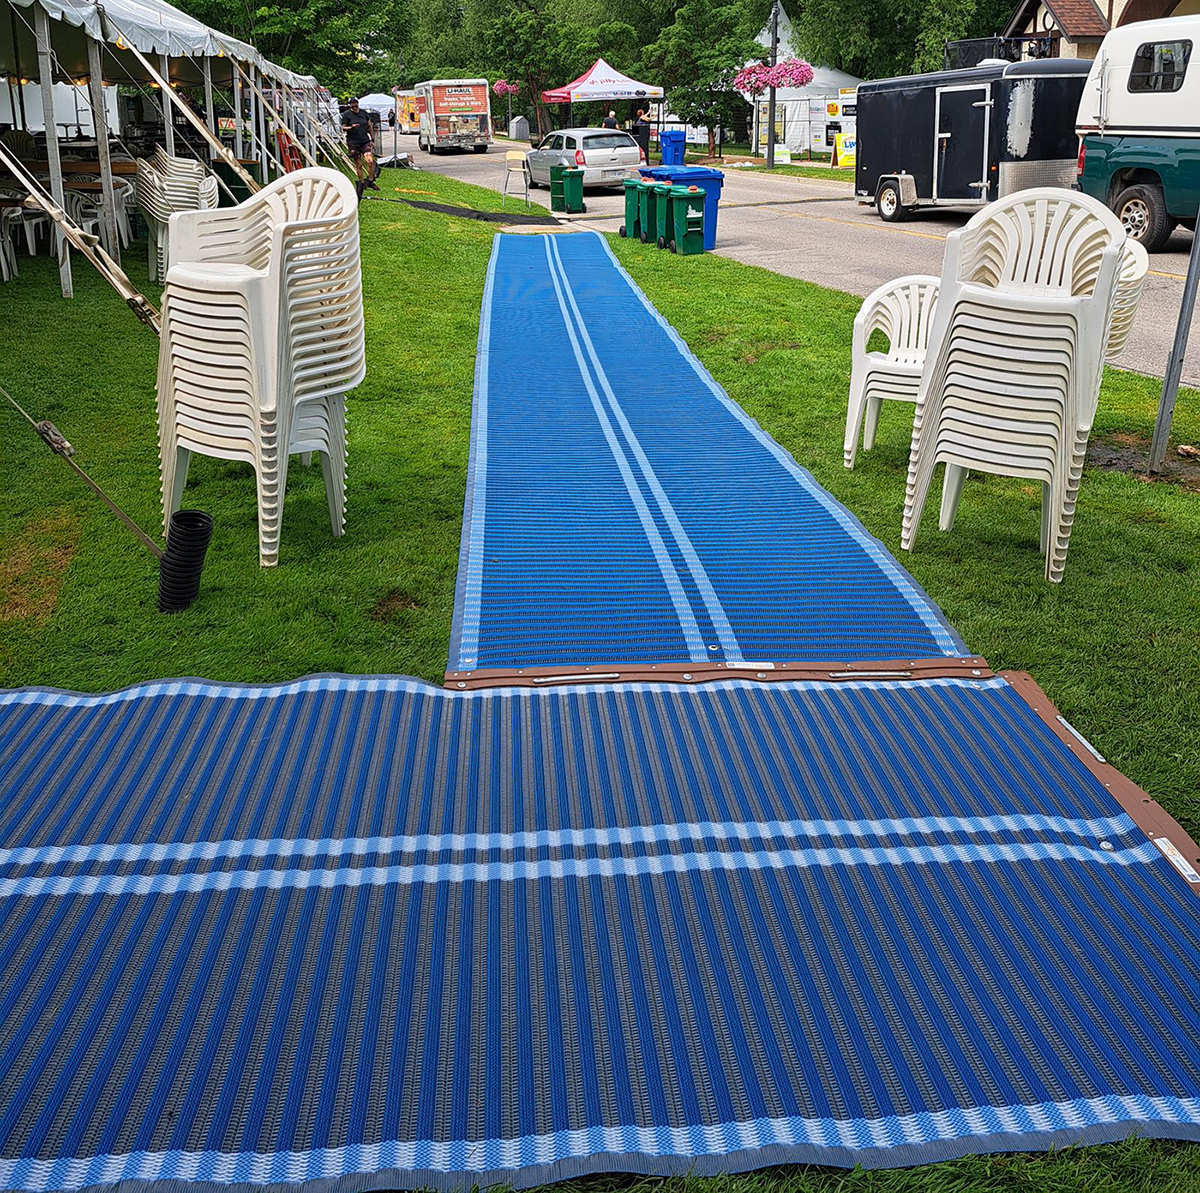 Blue mats laid on the grass, with tents and stacked white chairs.